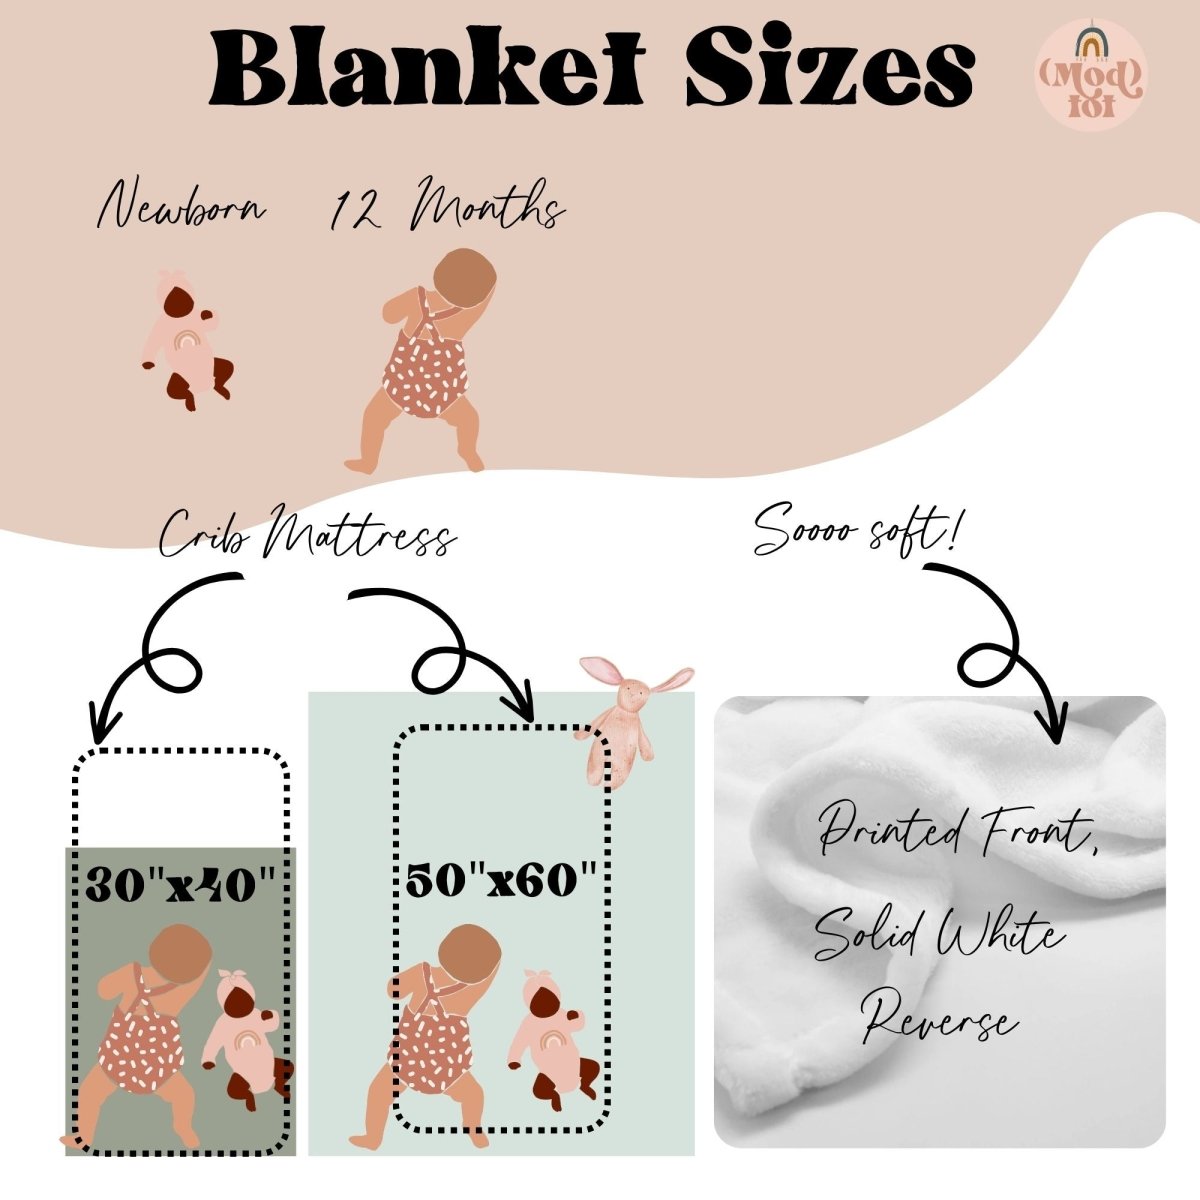 Sweet Vintage Floral Personalized Minky Blanket - gender_girl, Personalized_Yes, Sweet Vintage Floral